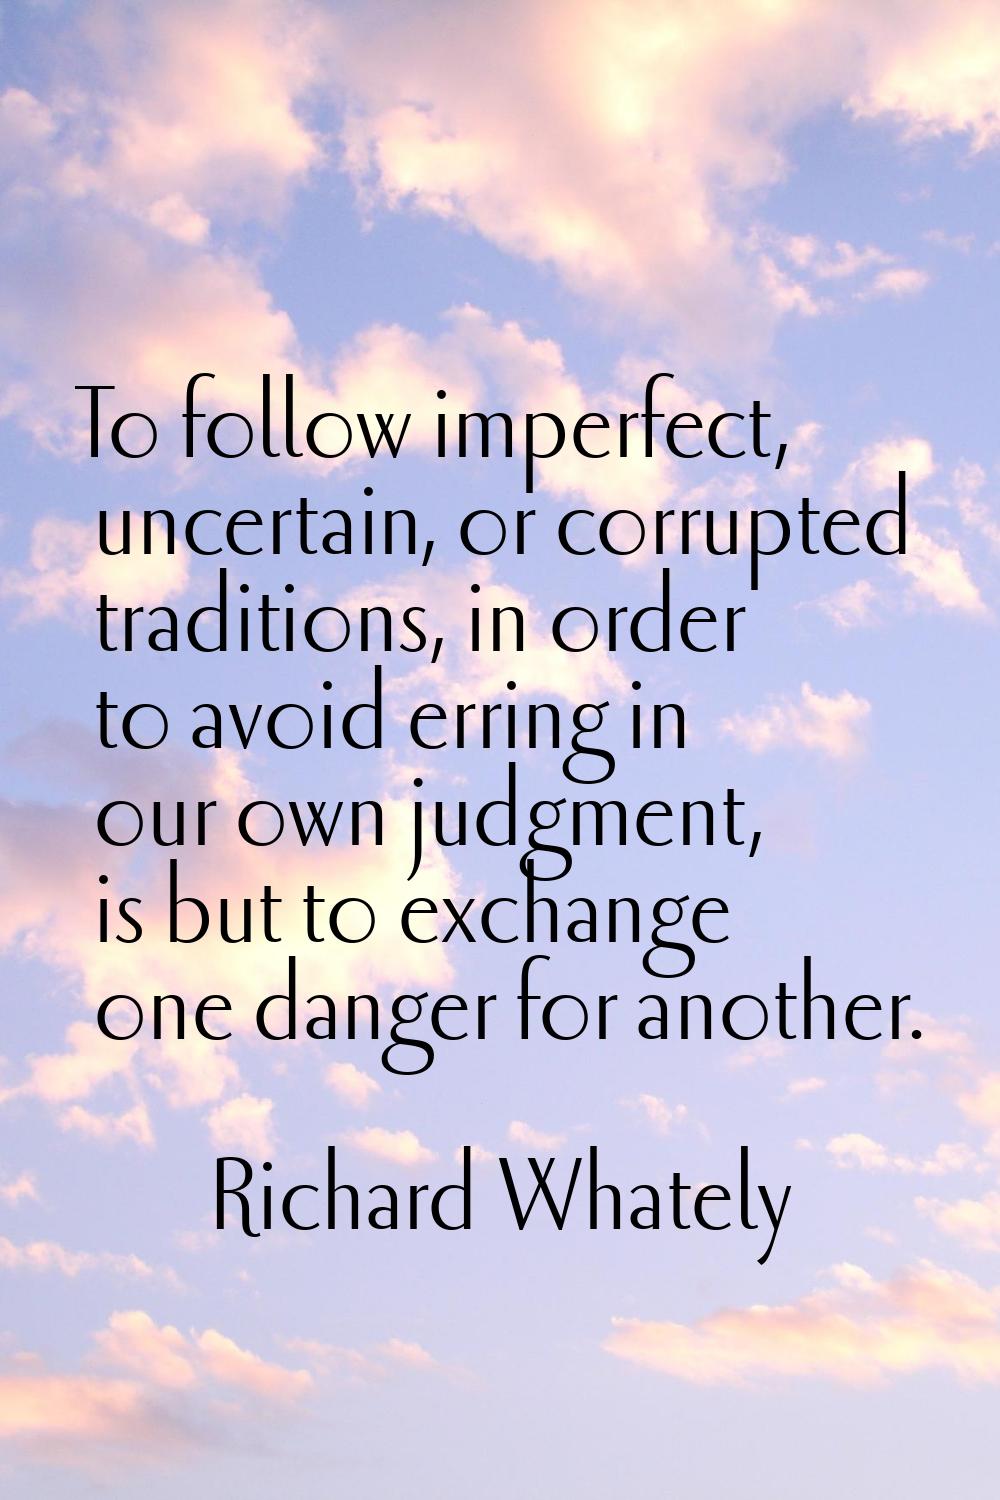 To follow imperfect, uncertain, or corrupted traditions, in order to avoid erring in our own judgme